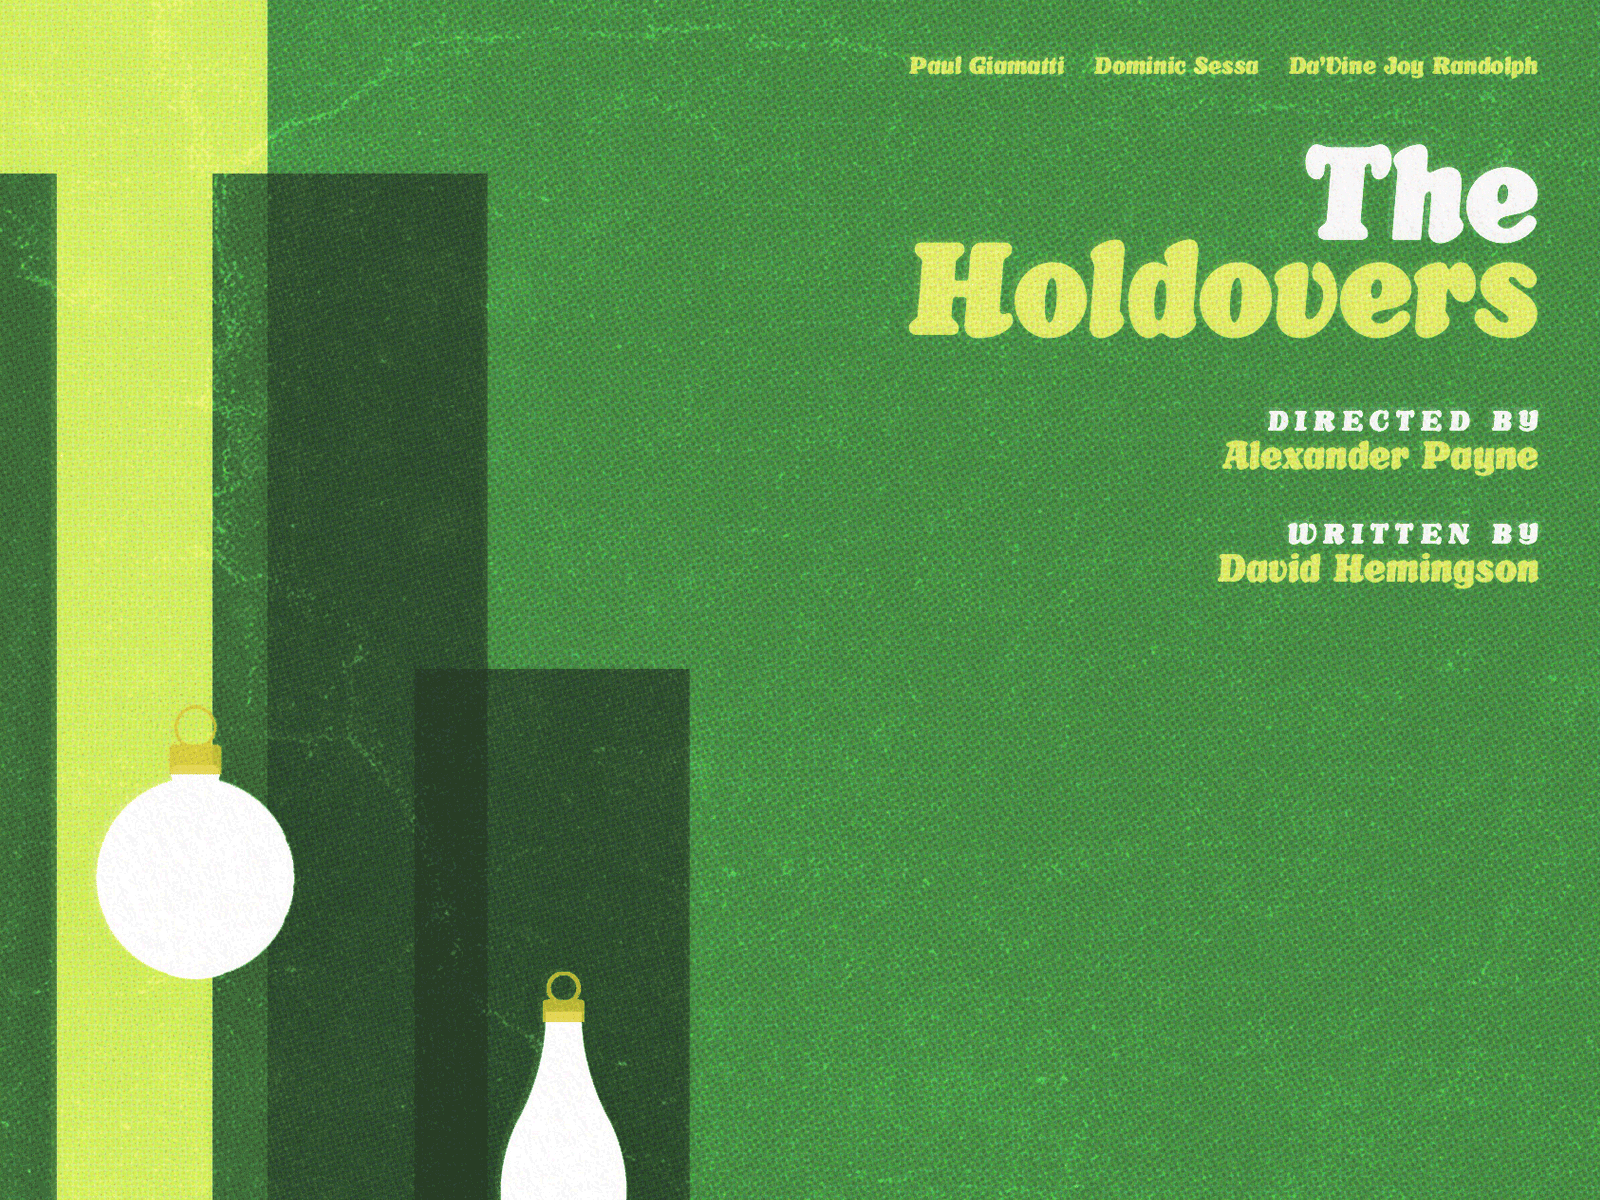 The Holdovers 1970 70s alexander payne animation chrismtas tree christmas cover holiday holidays movie poster movie posters paul giamatti poster posters retro the holdovers vintage